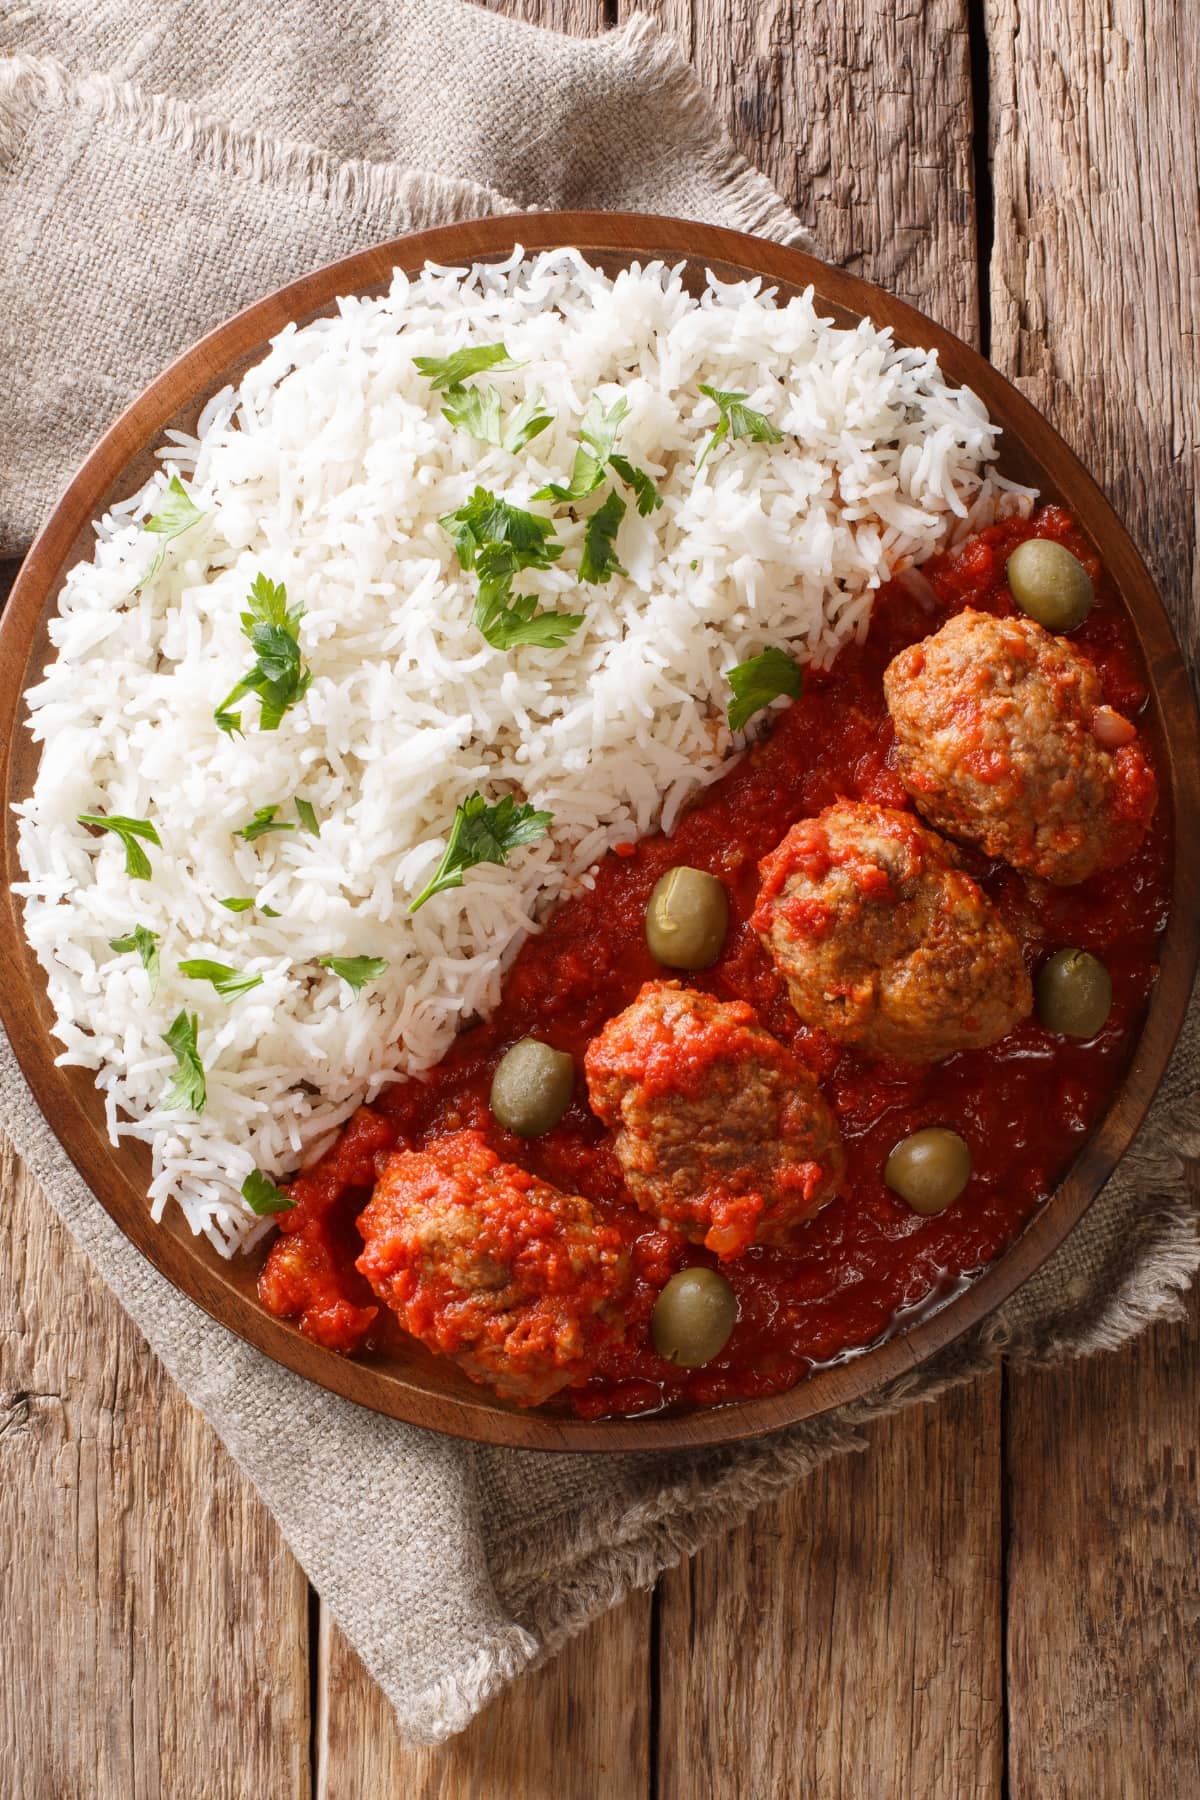 Greek Meatballs with Ground Beef, Tomato Sauce and Rice